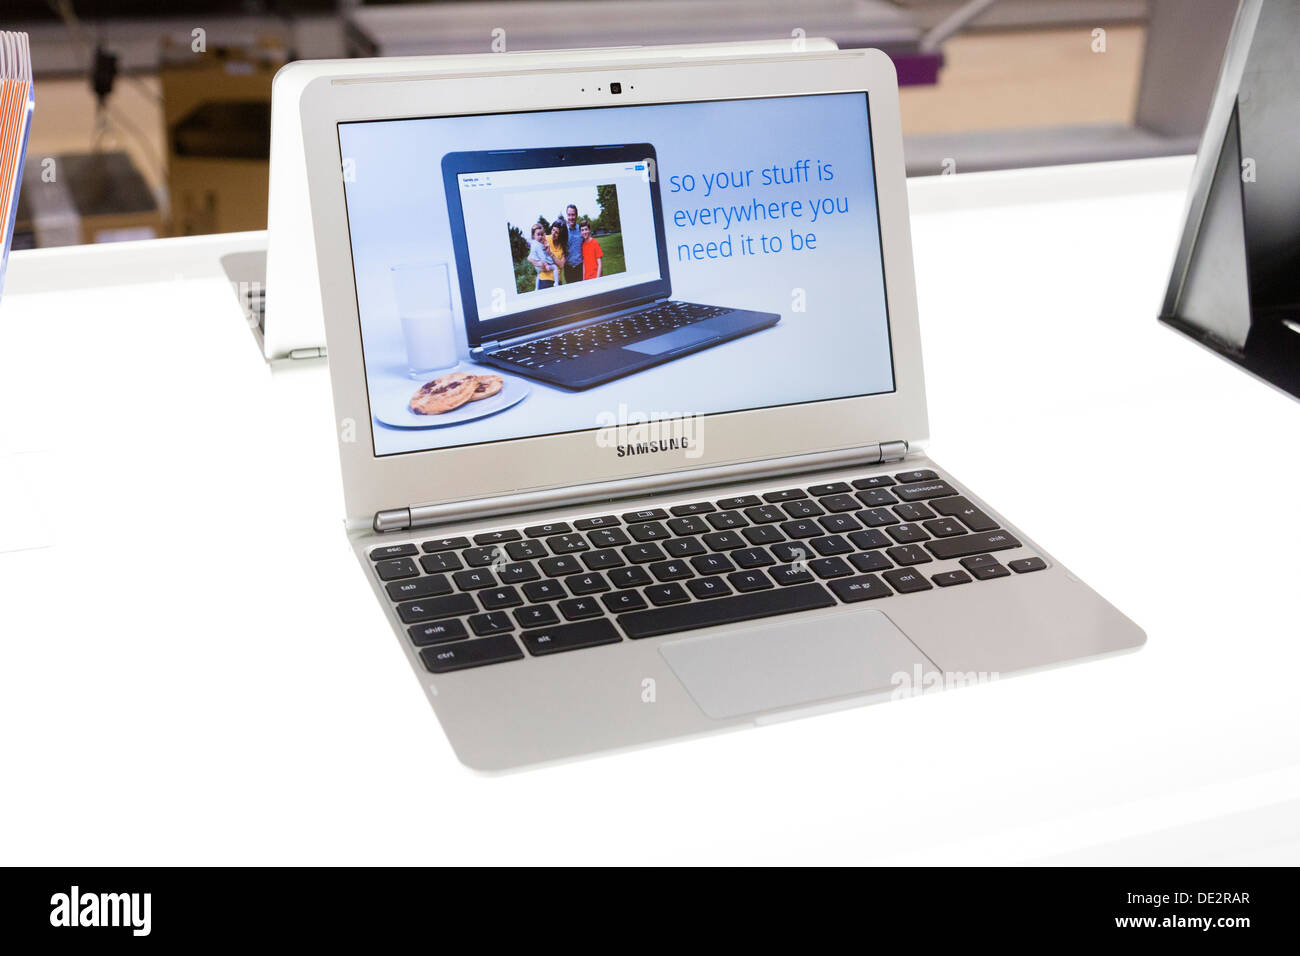 Google Chromebook running on a Samsung laptop computer in a retail store Stock Photo